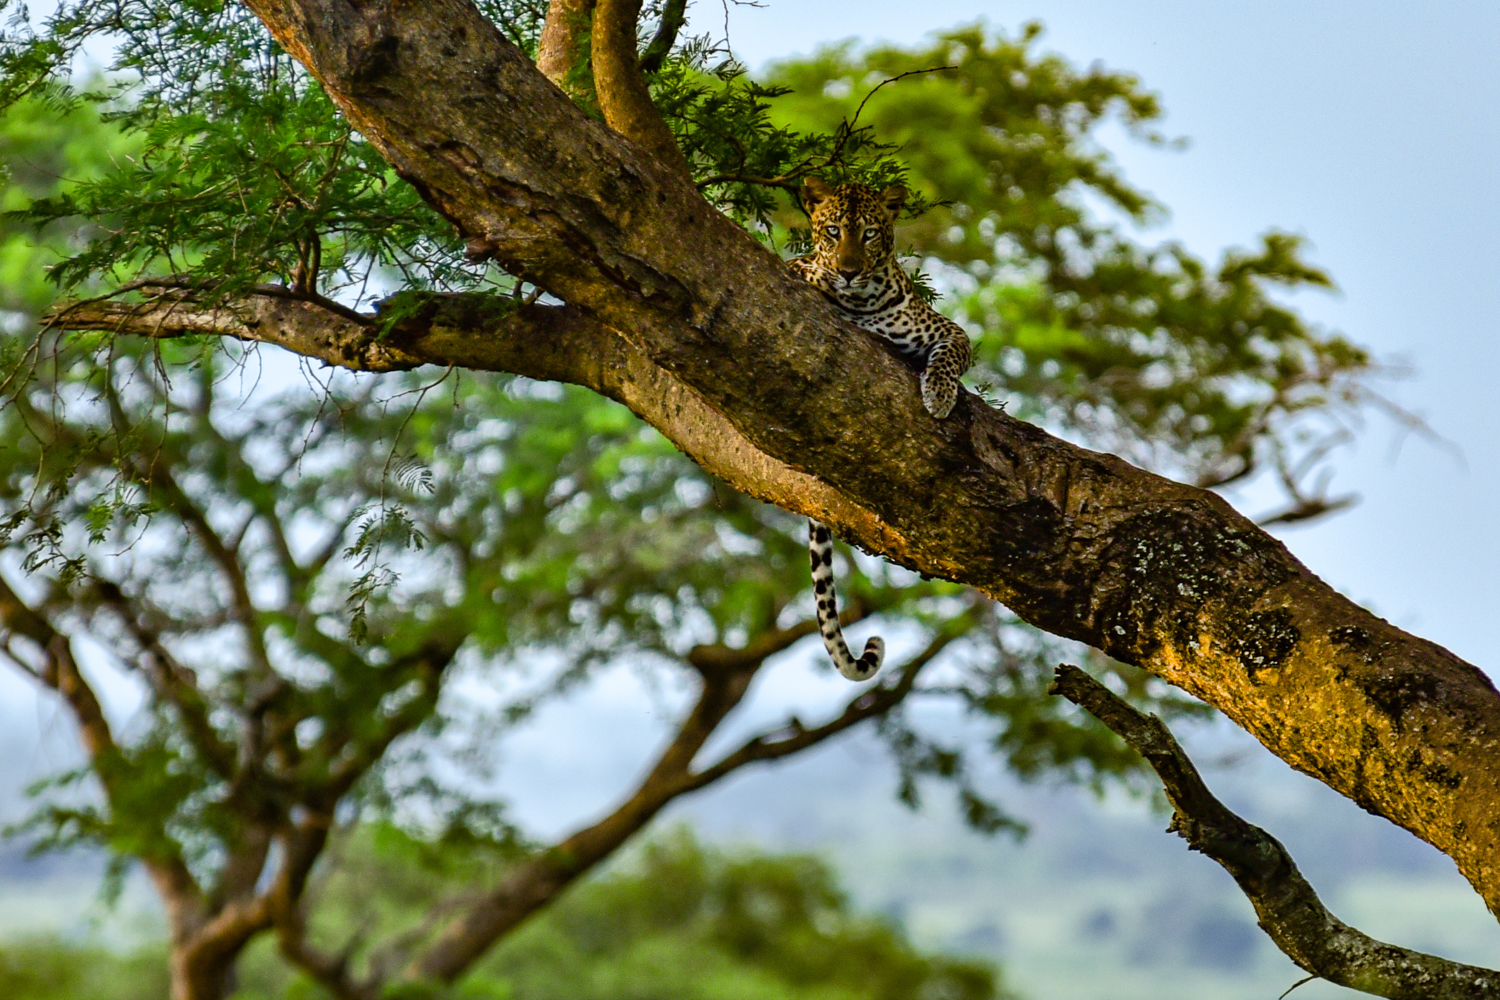 A leopard lazing in the tree in Murchison Falls National Park.